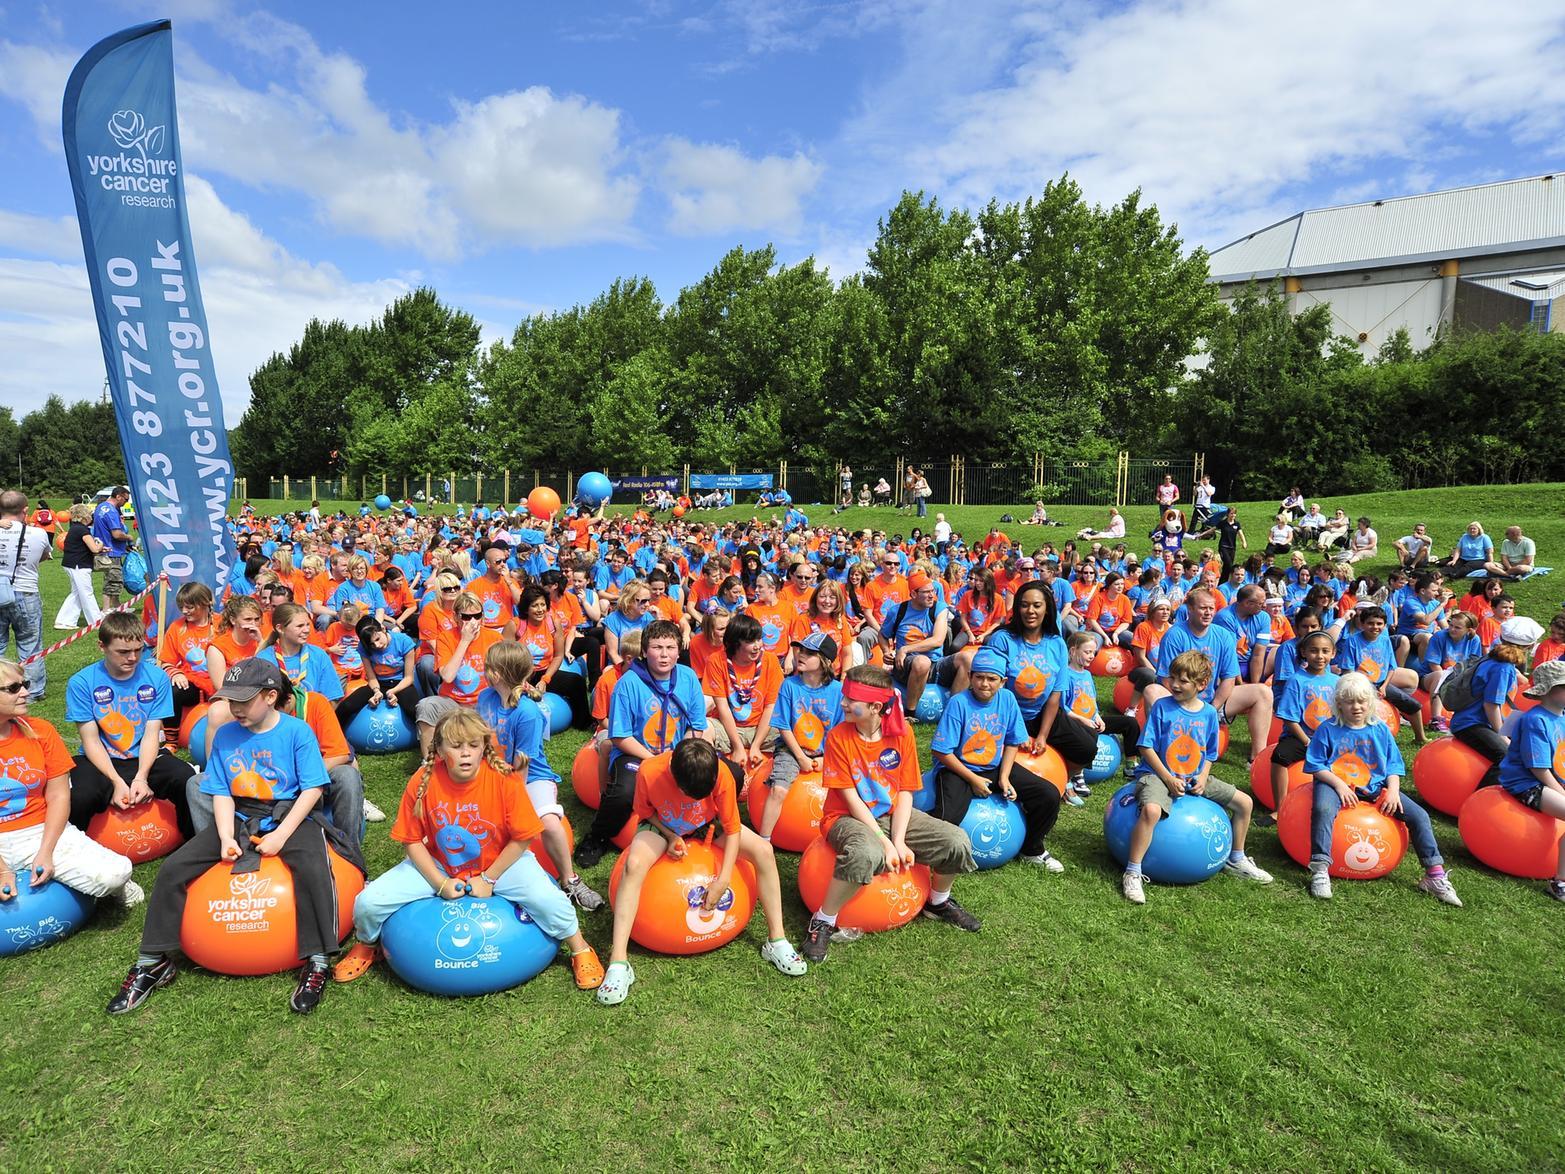 The largest space hopper race was achieved by 771 participants at an event organised by Yorkshire Cancer Research, Weston Park Hospital Cancer Charity and Cavendish Cancer Care (all UK) at the Don Valley Grass Bowl in Sheffield, England, UK, on 25 July 2010.